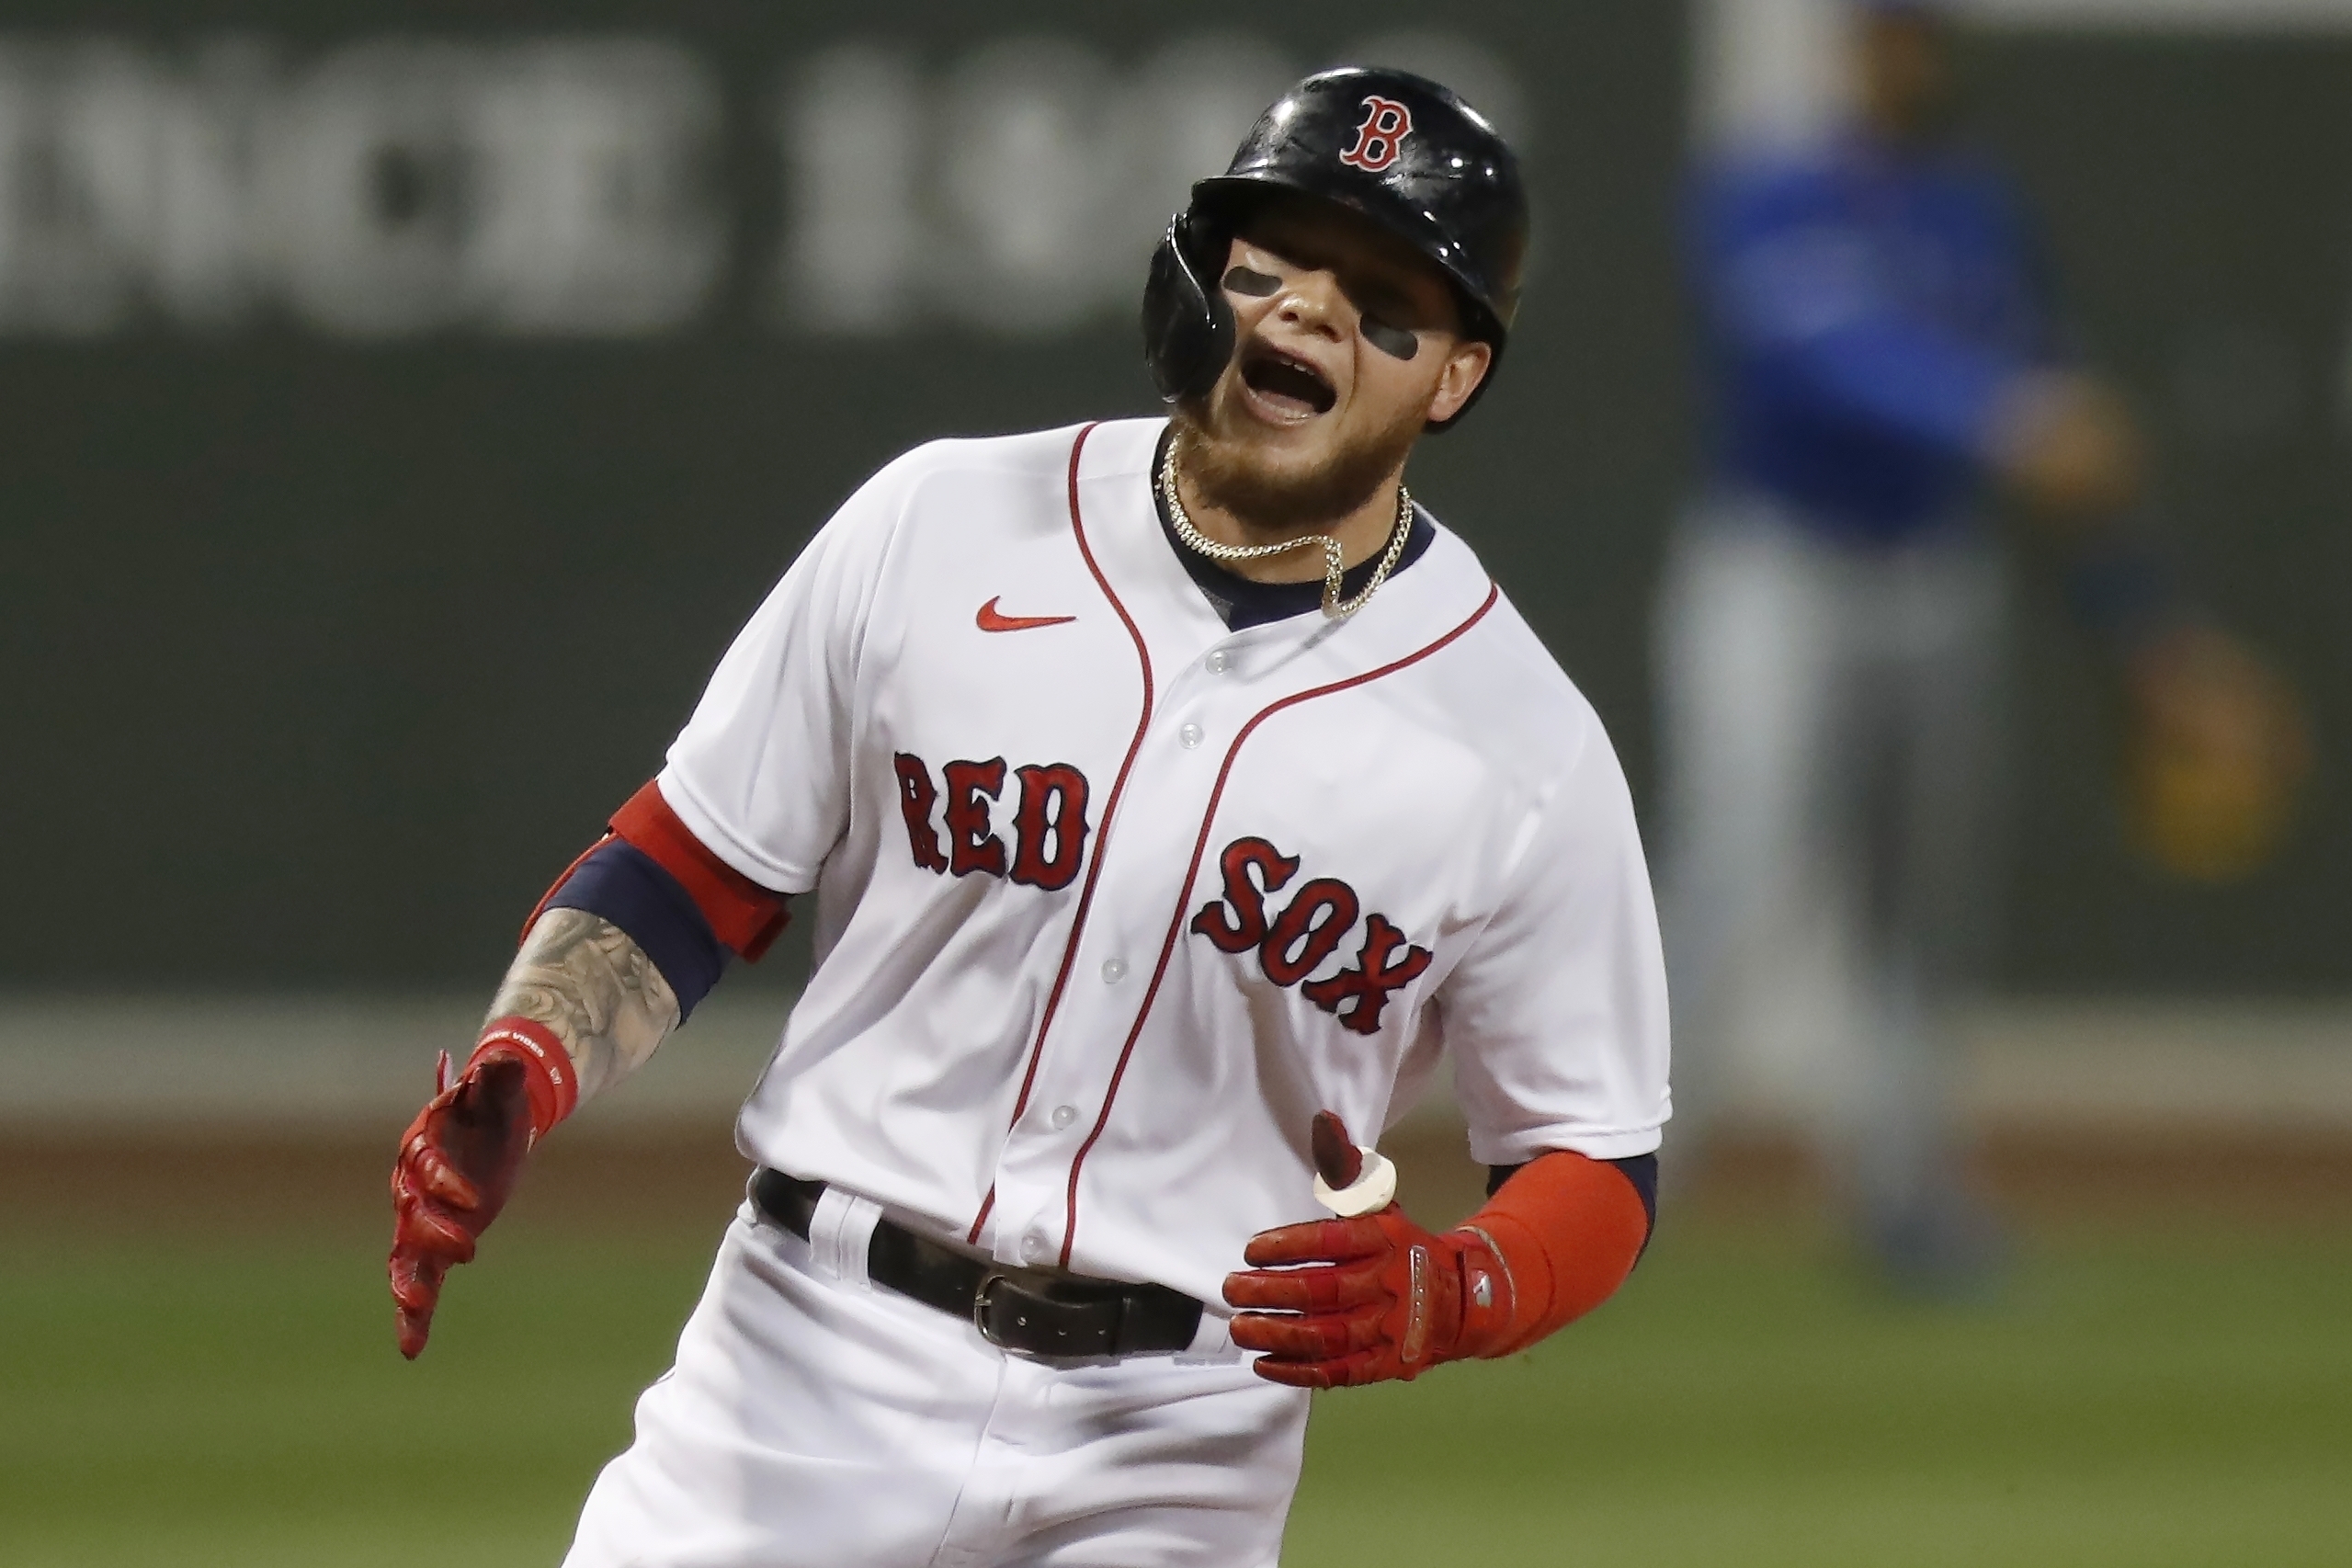 Boston Red Sox: Mookie Betts has the making of something legendary